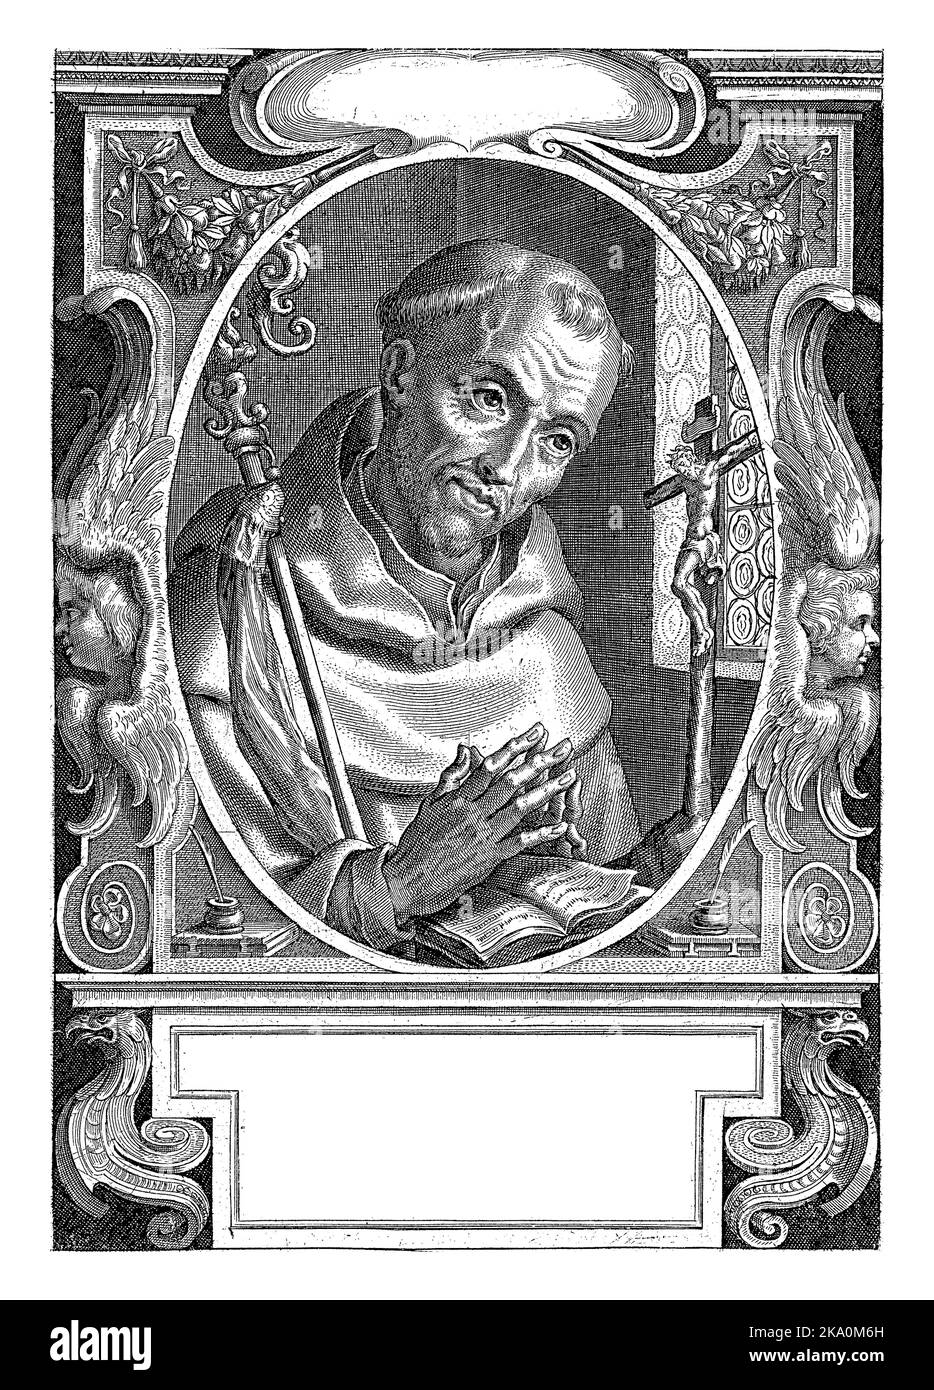 Saint Bernard of Claivaux, founder of the Cistercian Order, in prayer, hands folded over a book. Below the portrait a cartouche with a short Latin tex Stock Photo